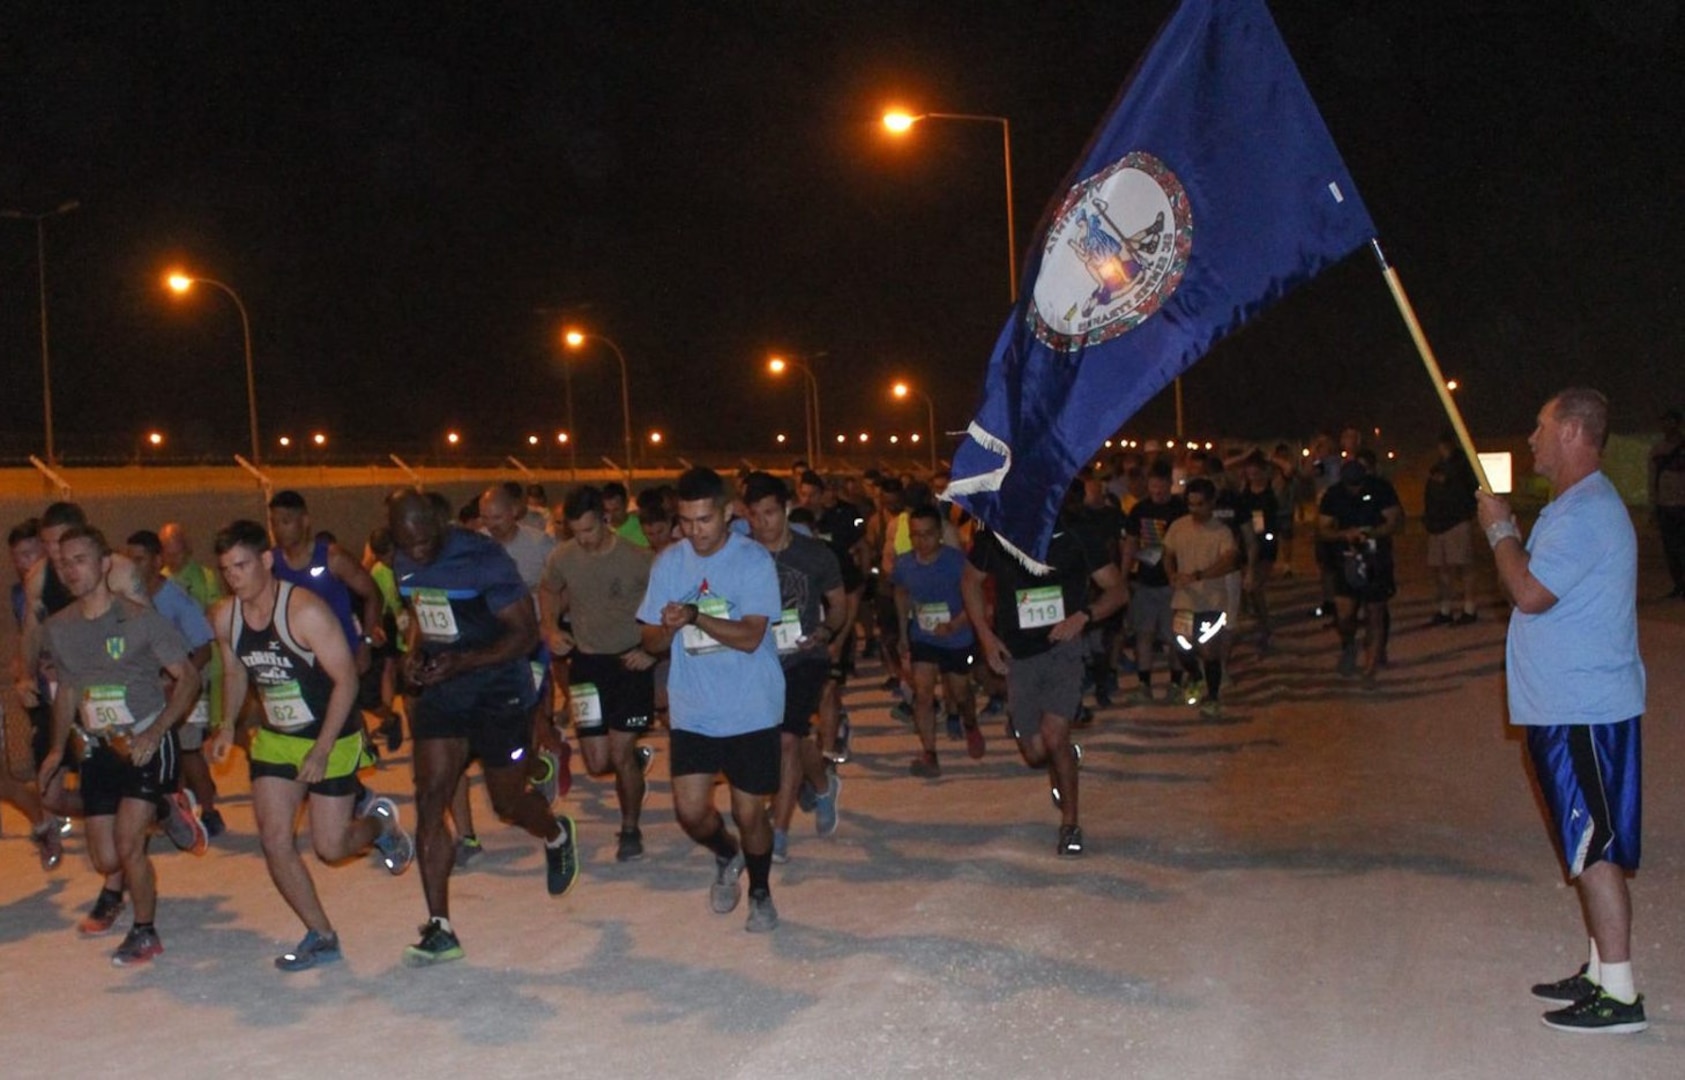 Red Dragons host 10-Miler while deployed in the Middle East